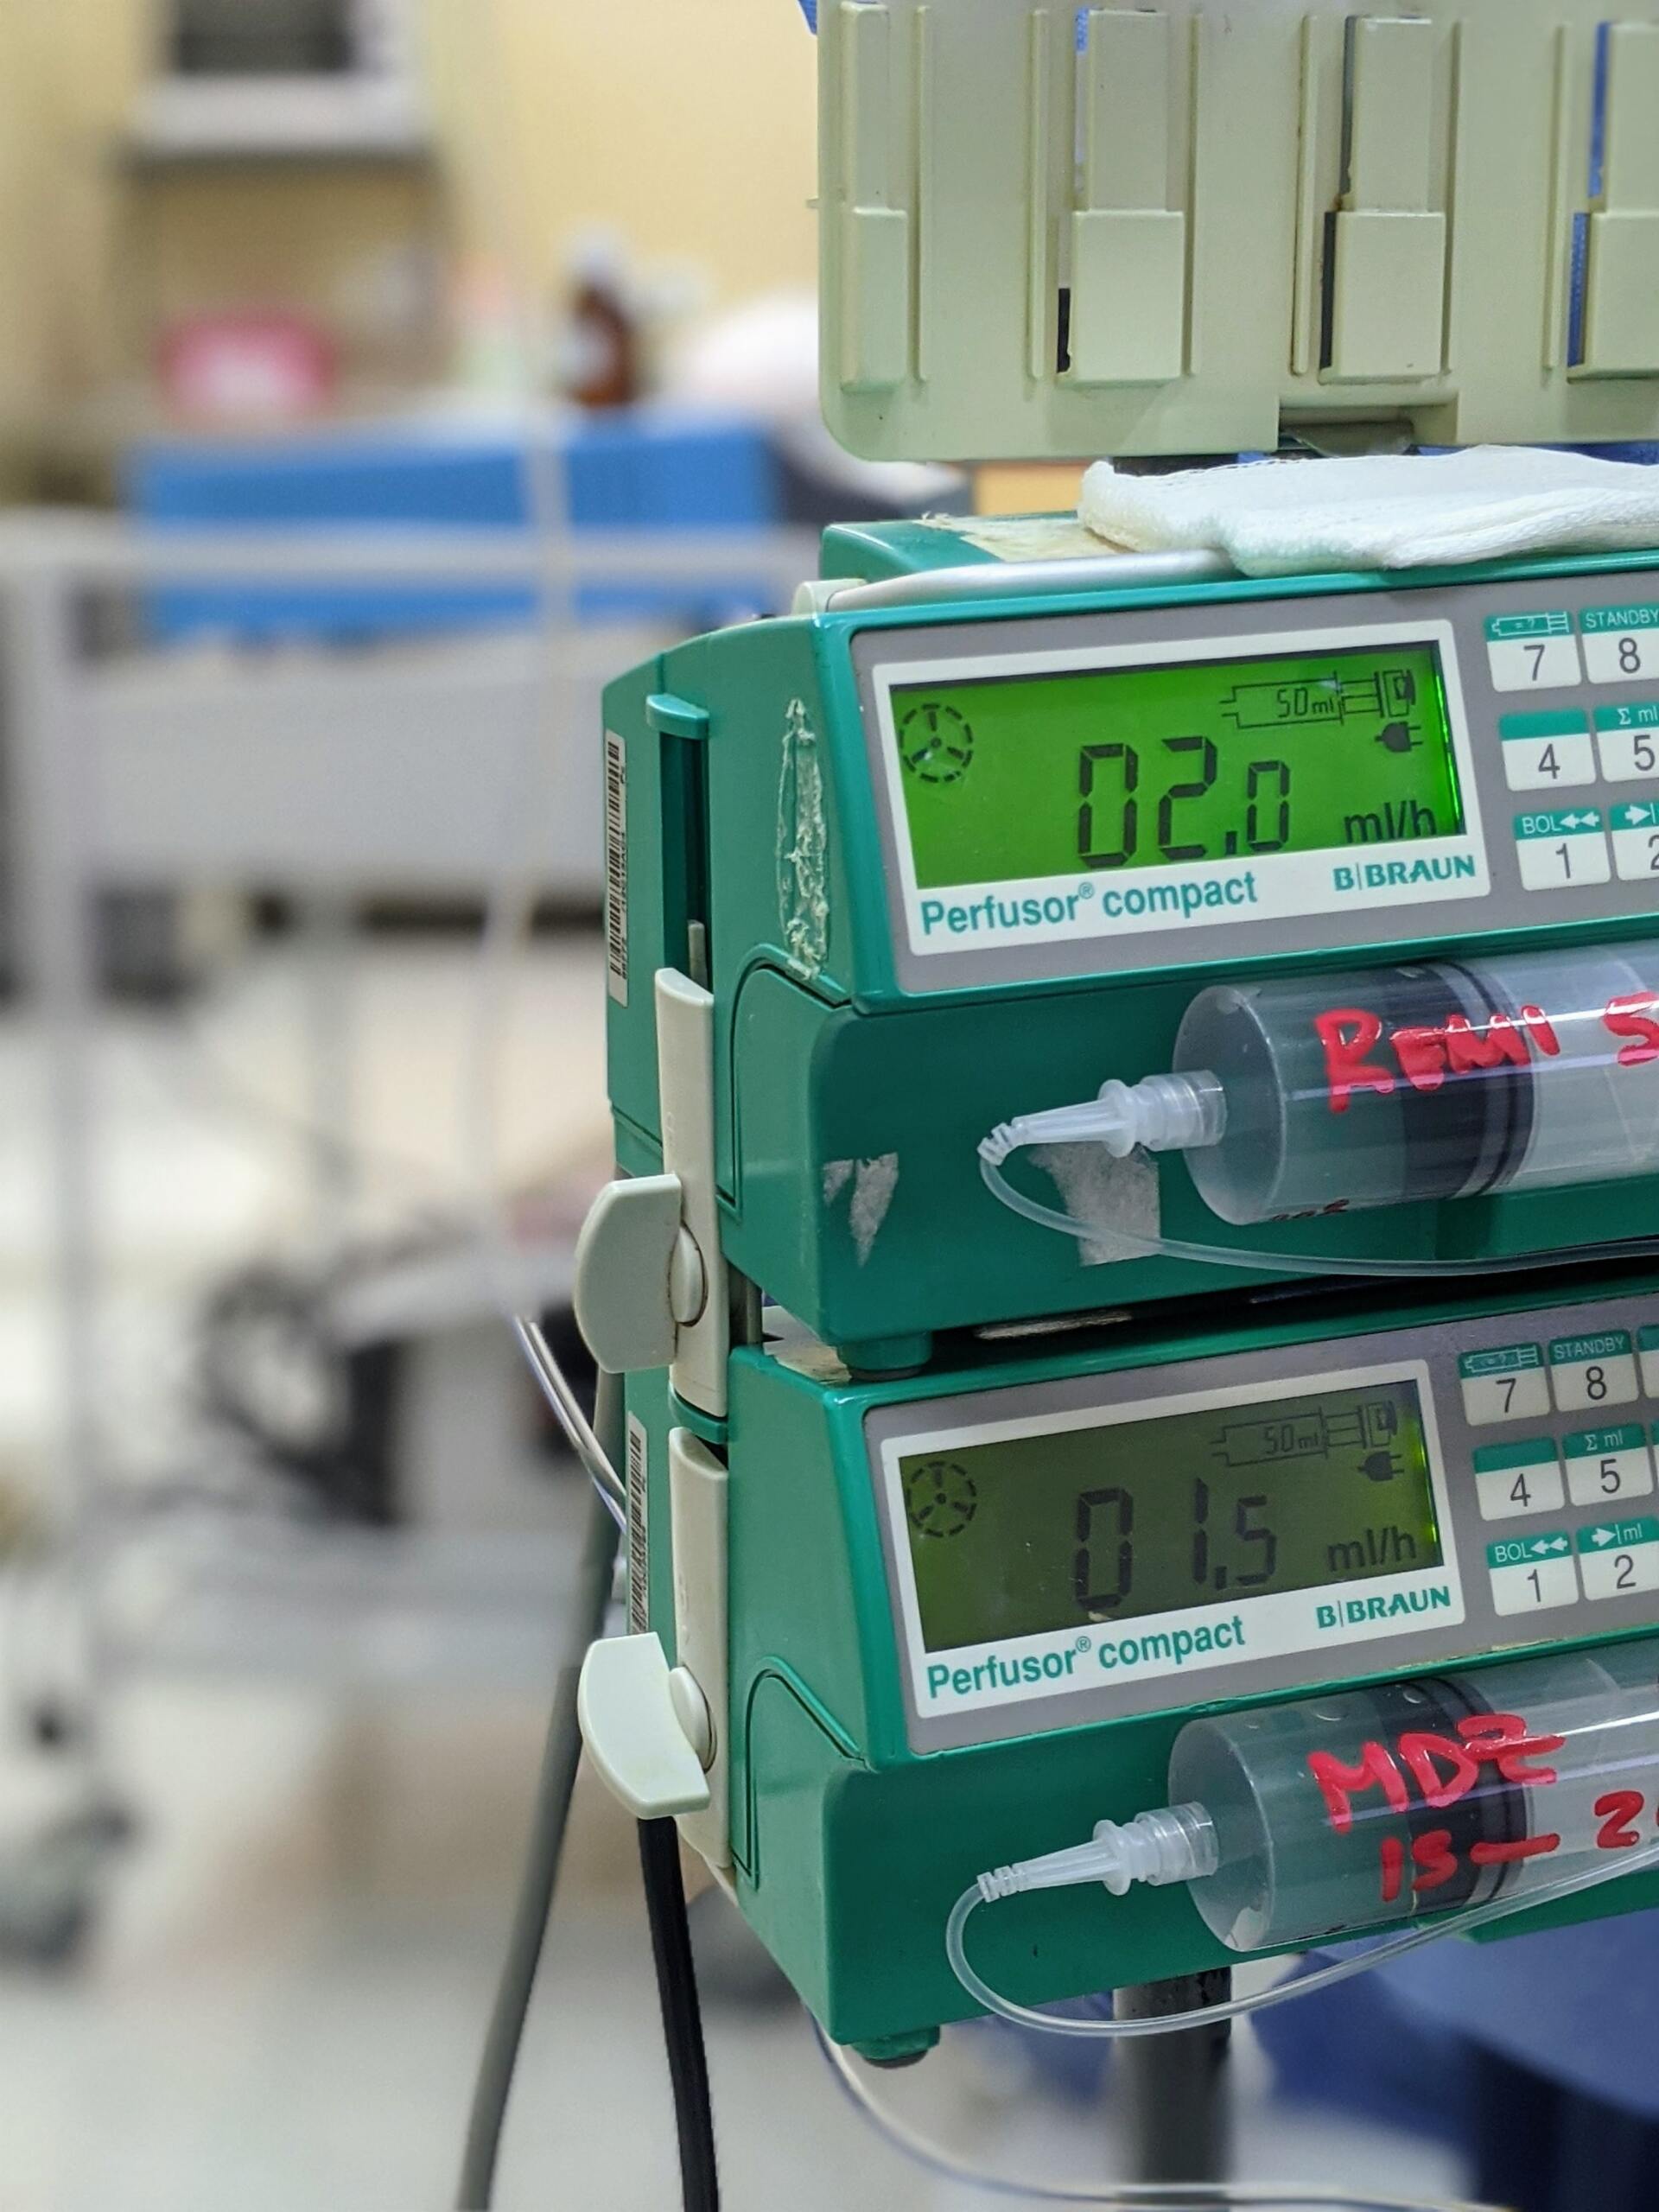 A stack of infusion pumps with syringes attached to them in a hospital room.